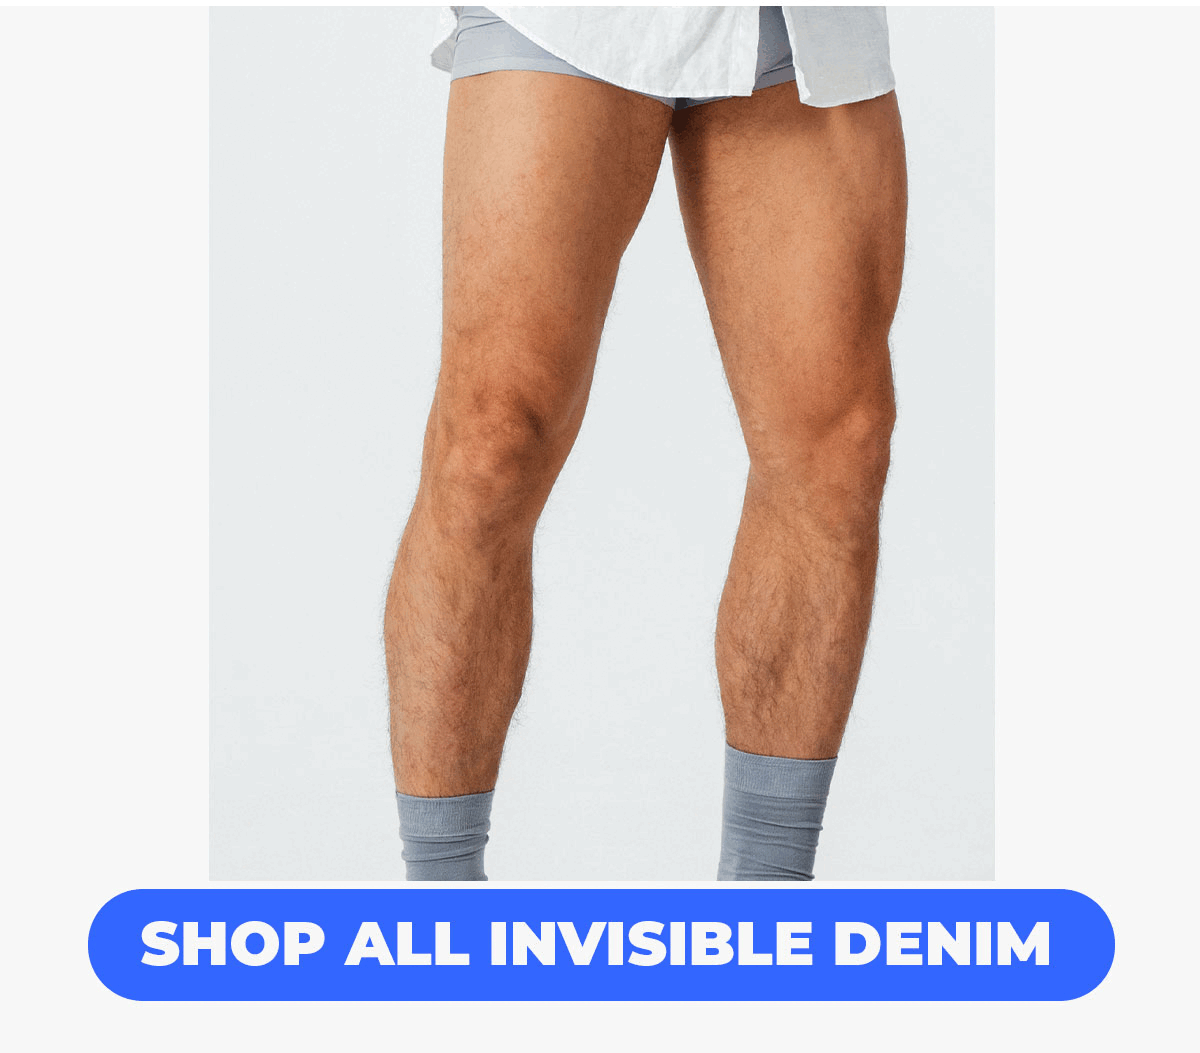 Rotating models wearing shirt, underwear, socks with no pants. Button to shop all invisible denim.